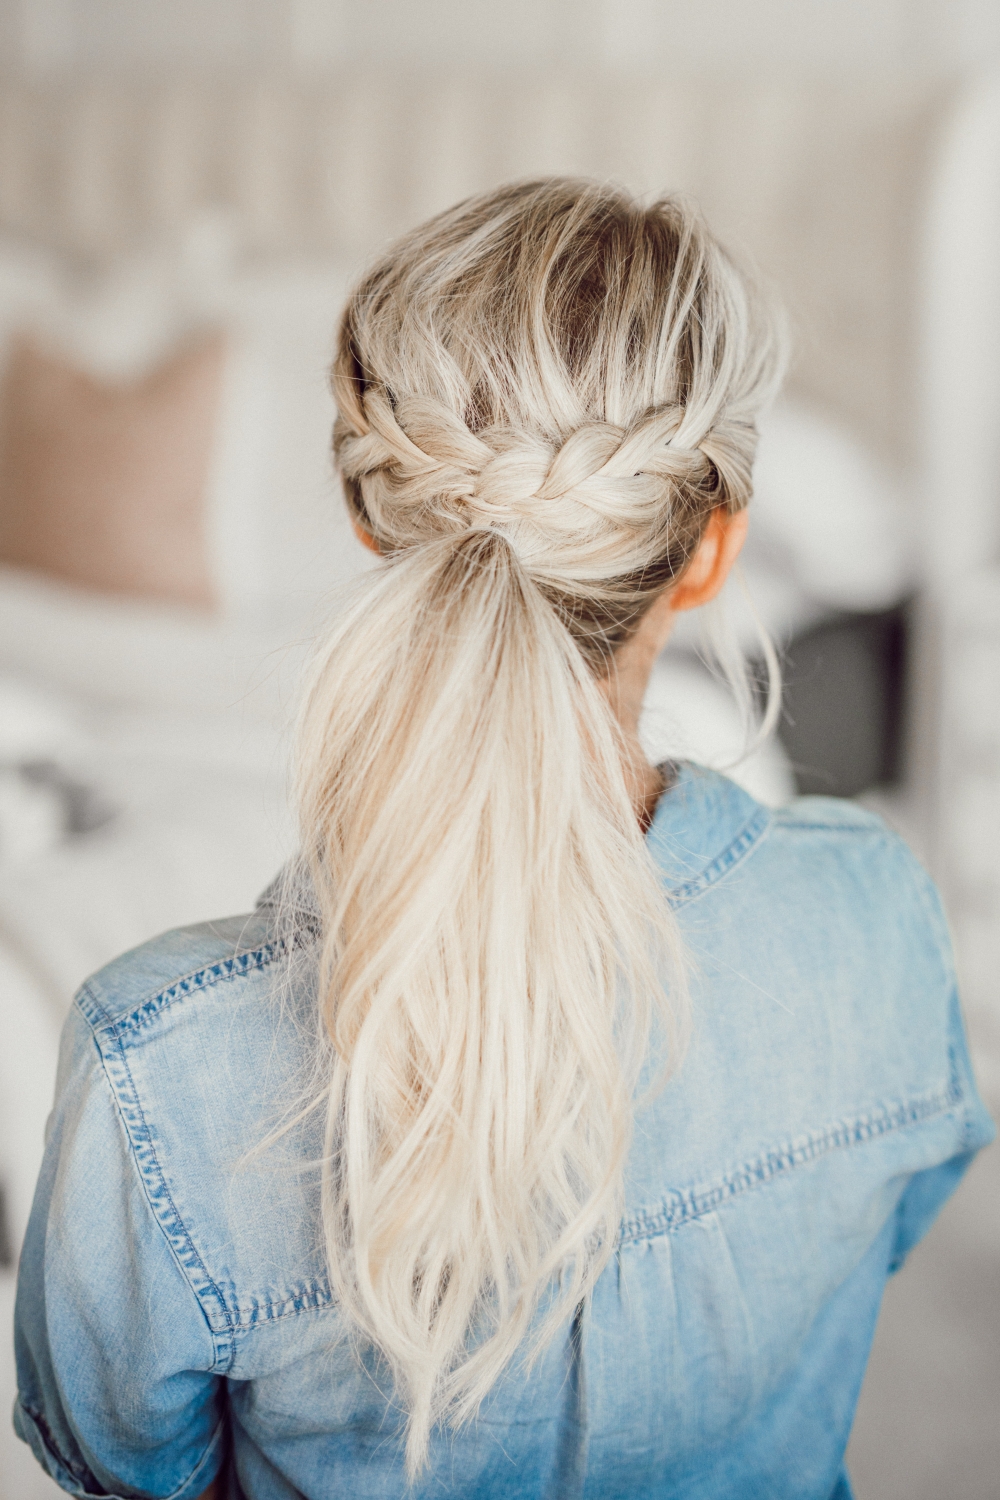 27 Ponytail Hairstyles and Ideas for 2020 - Easy Ponytail Tutorials